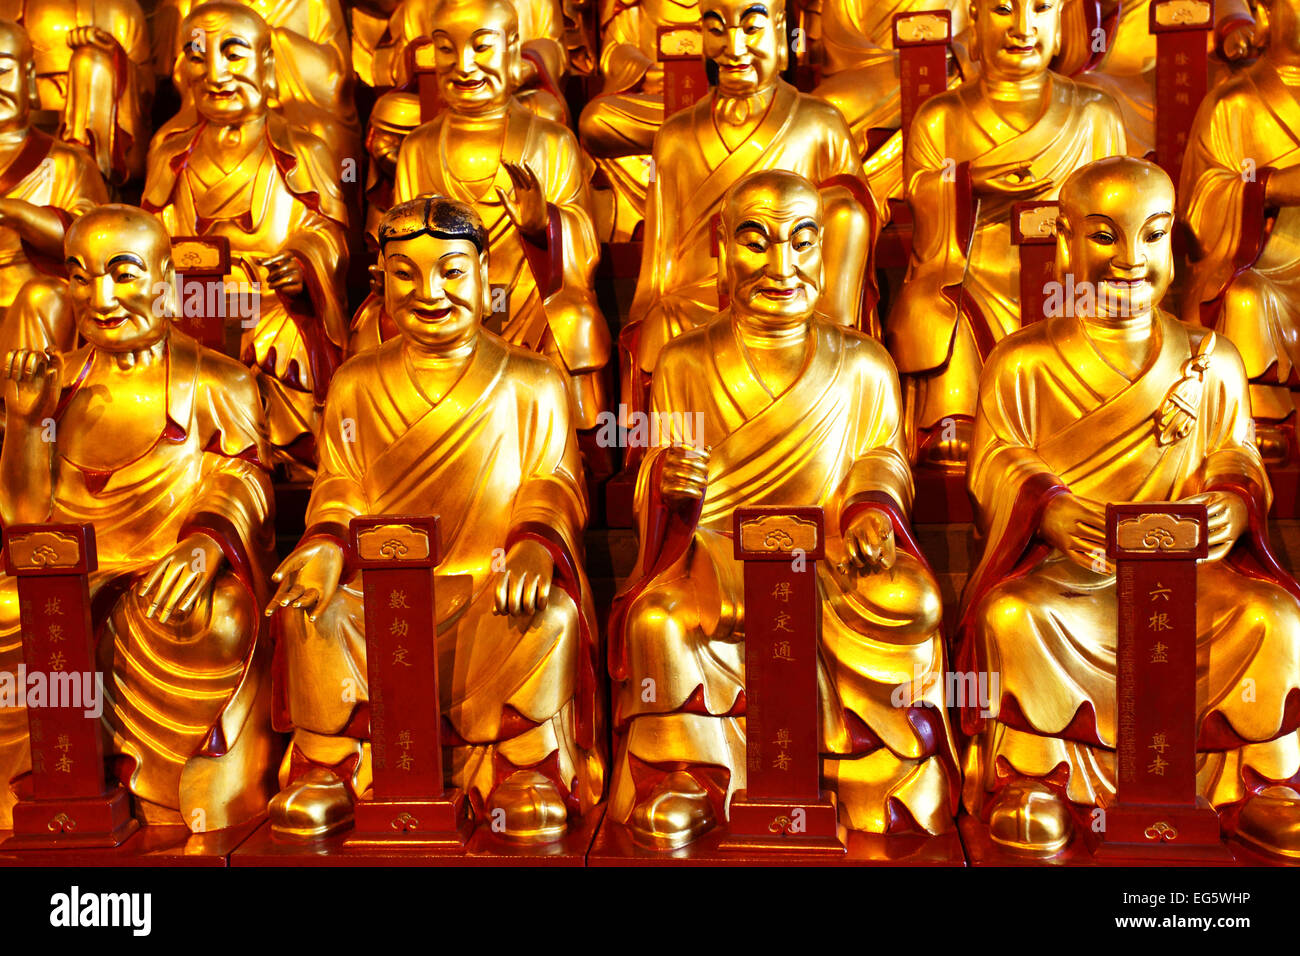 Gold statues of the Lohans in Longhua buddhist temple, Shanghai, China Stock Photo